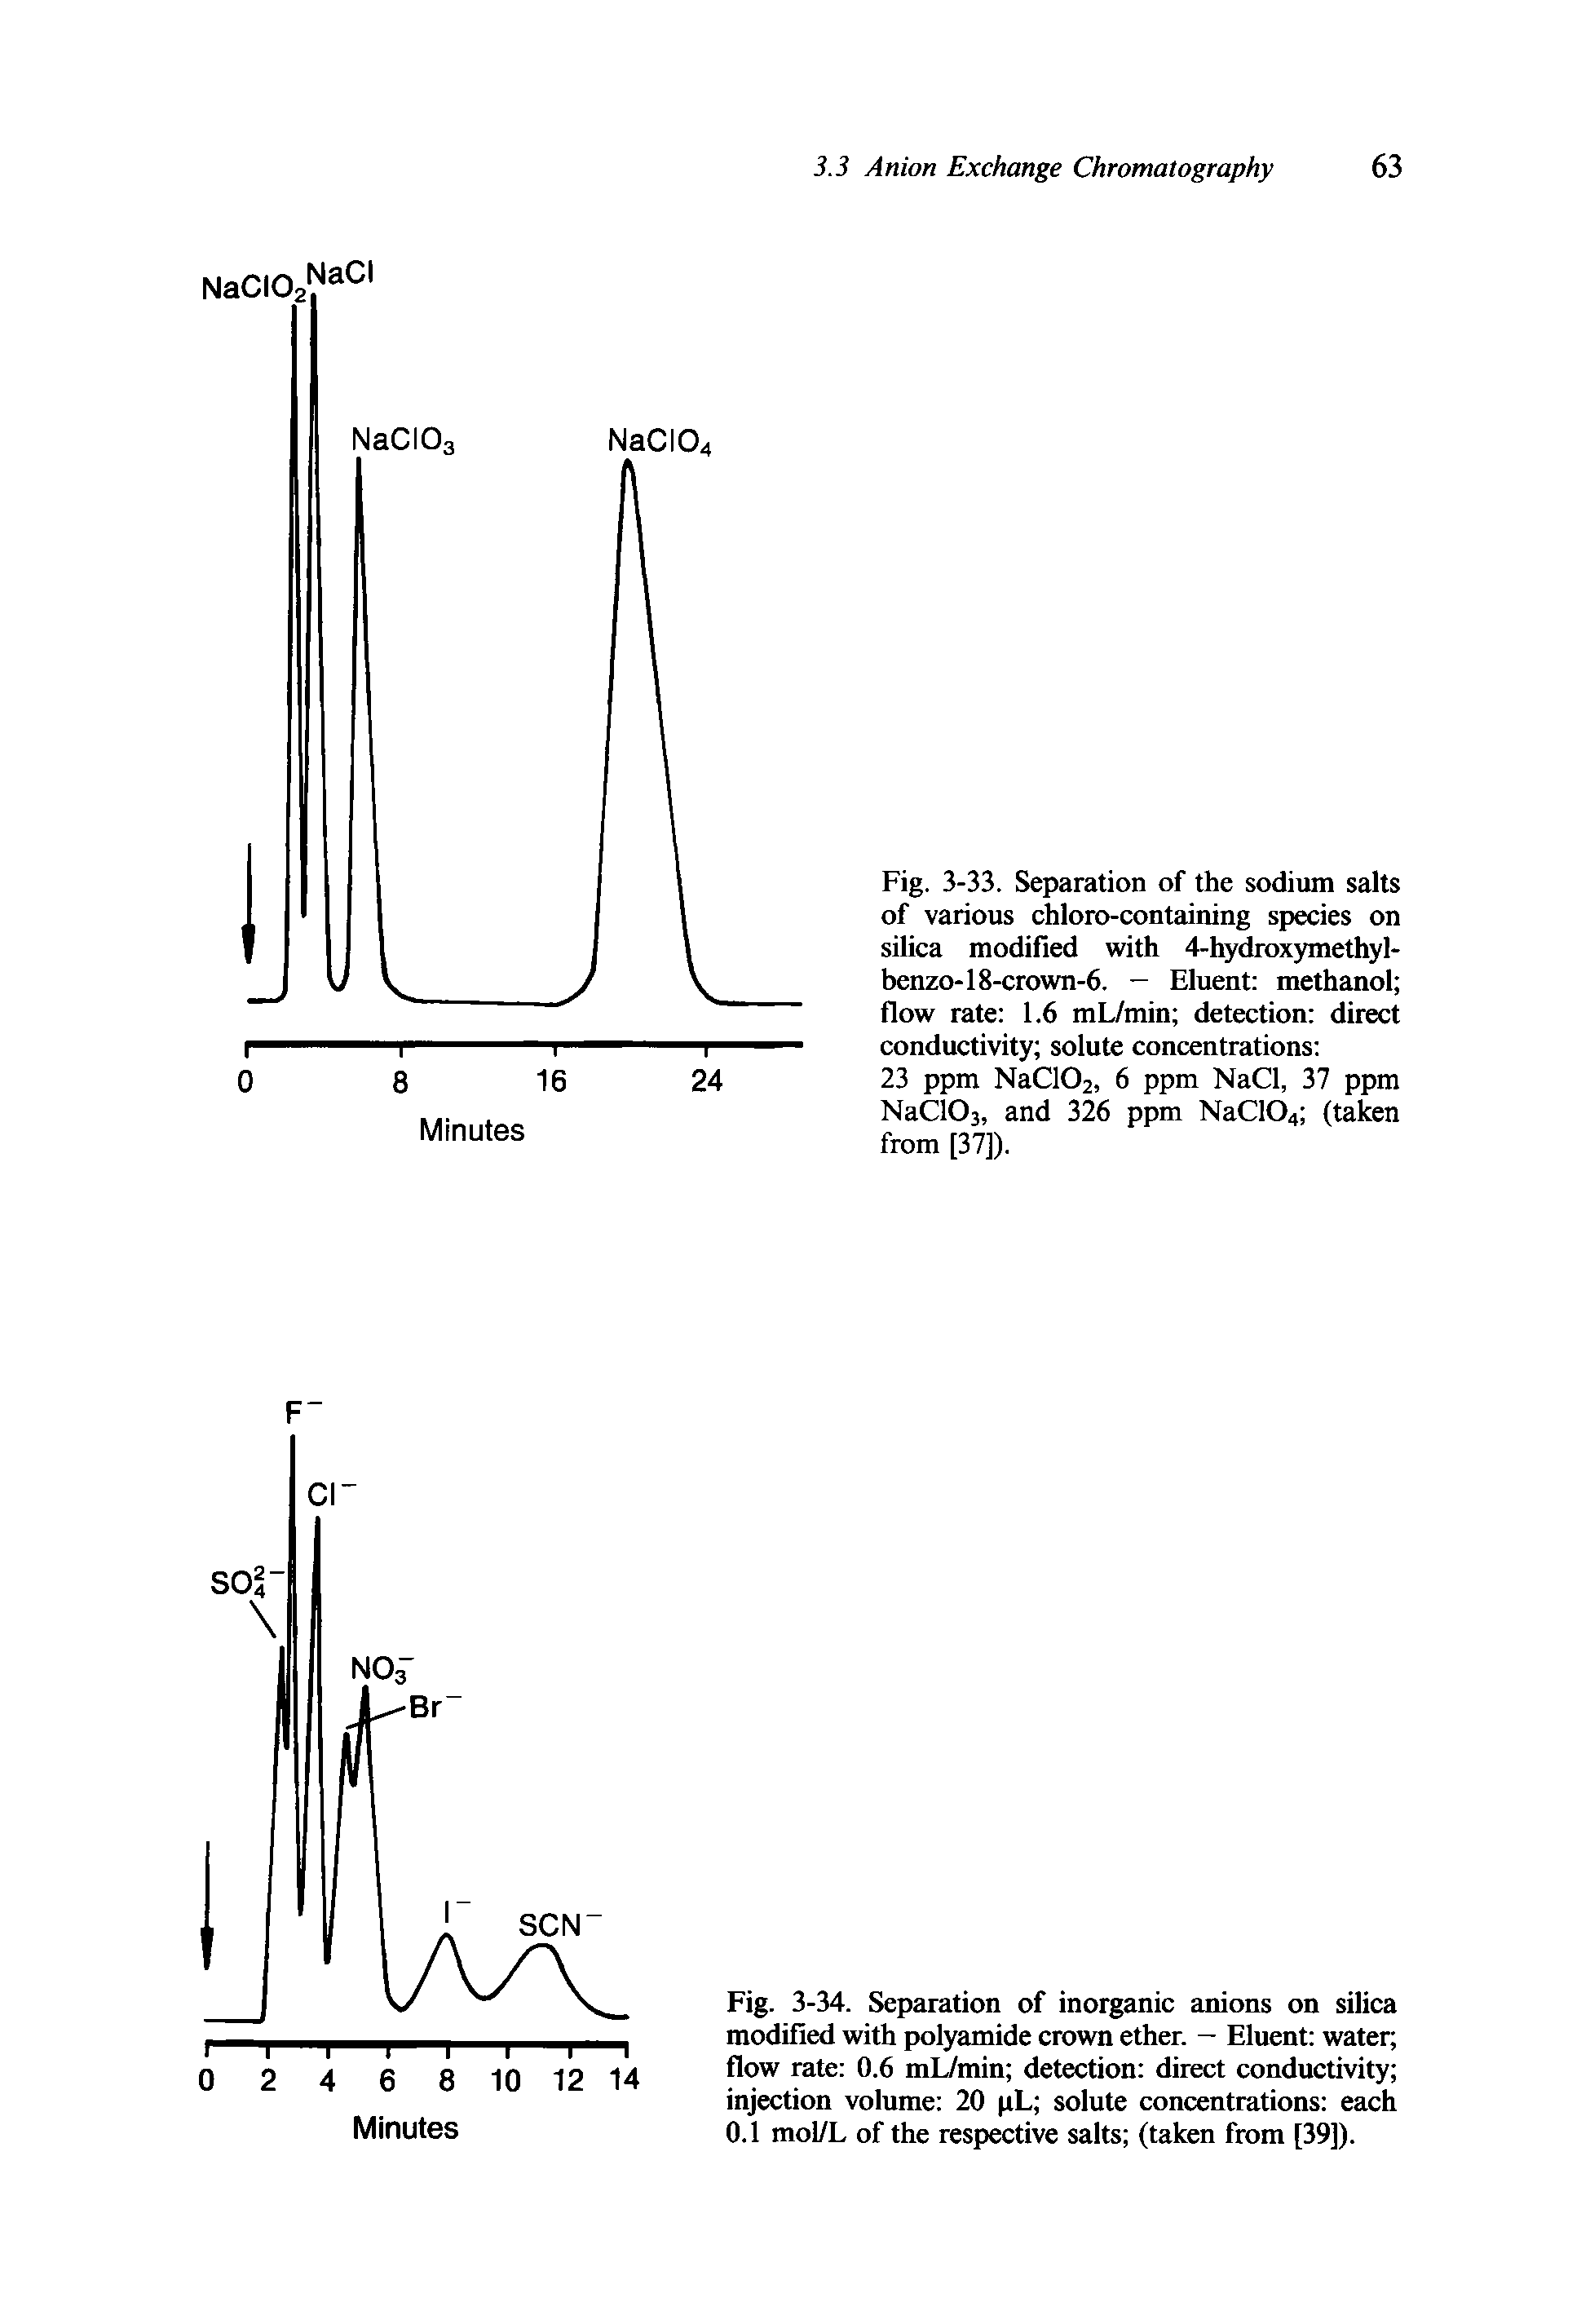 Fig. 3-34. Separation of inorganic anions on silica modified with polyamide crown ether. - Eluent water flow rate 0.6 mL/min detection direct conductivity injection volume 20 pL solute concentrations each 0.1 mol/L of the respective salts (taken from [39]).